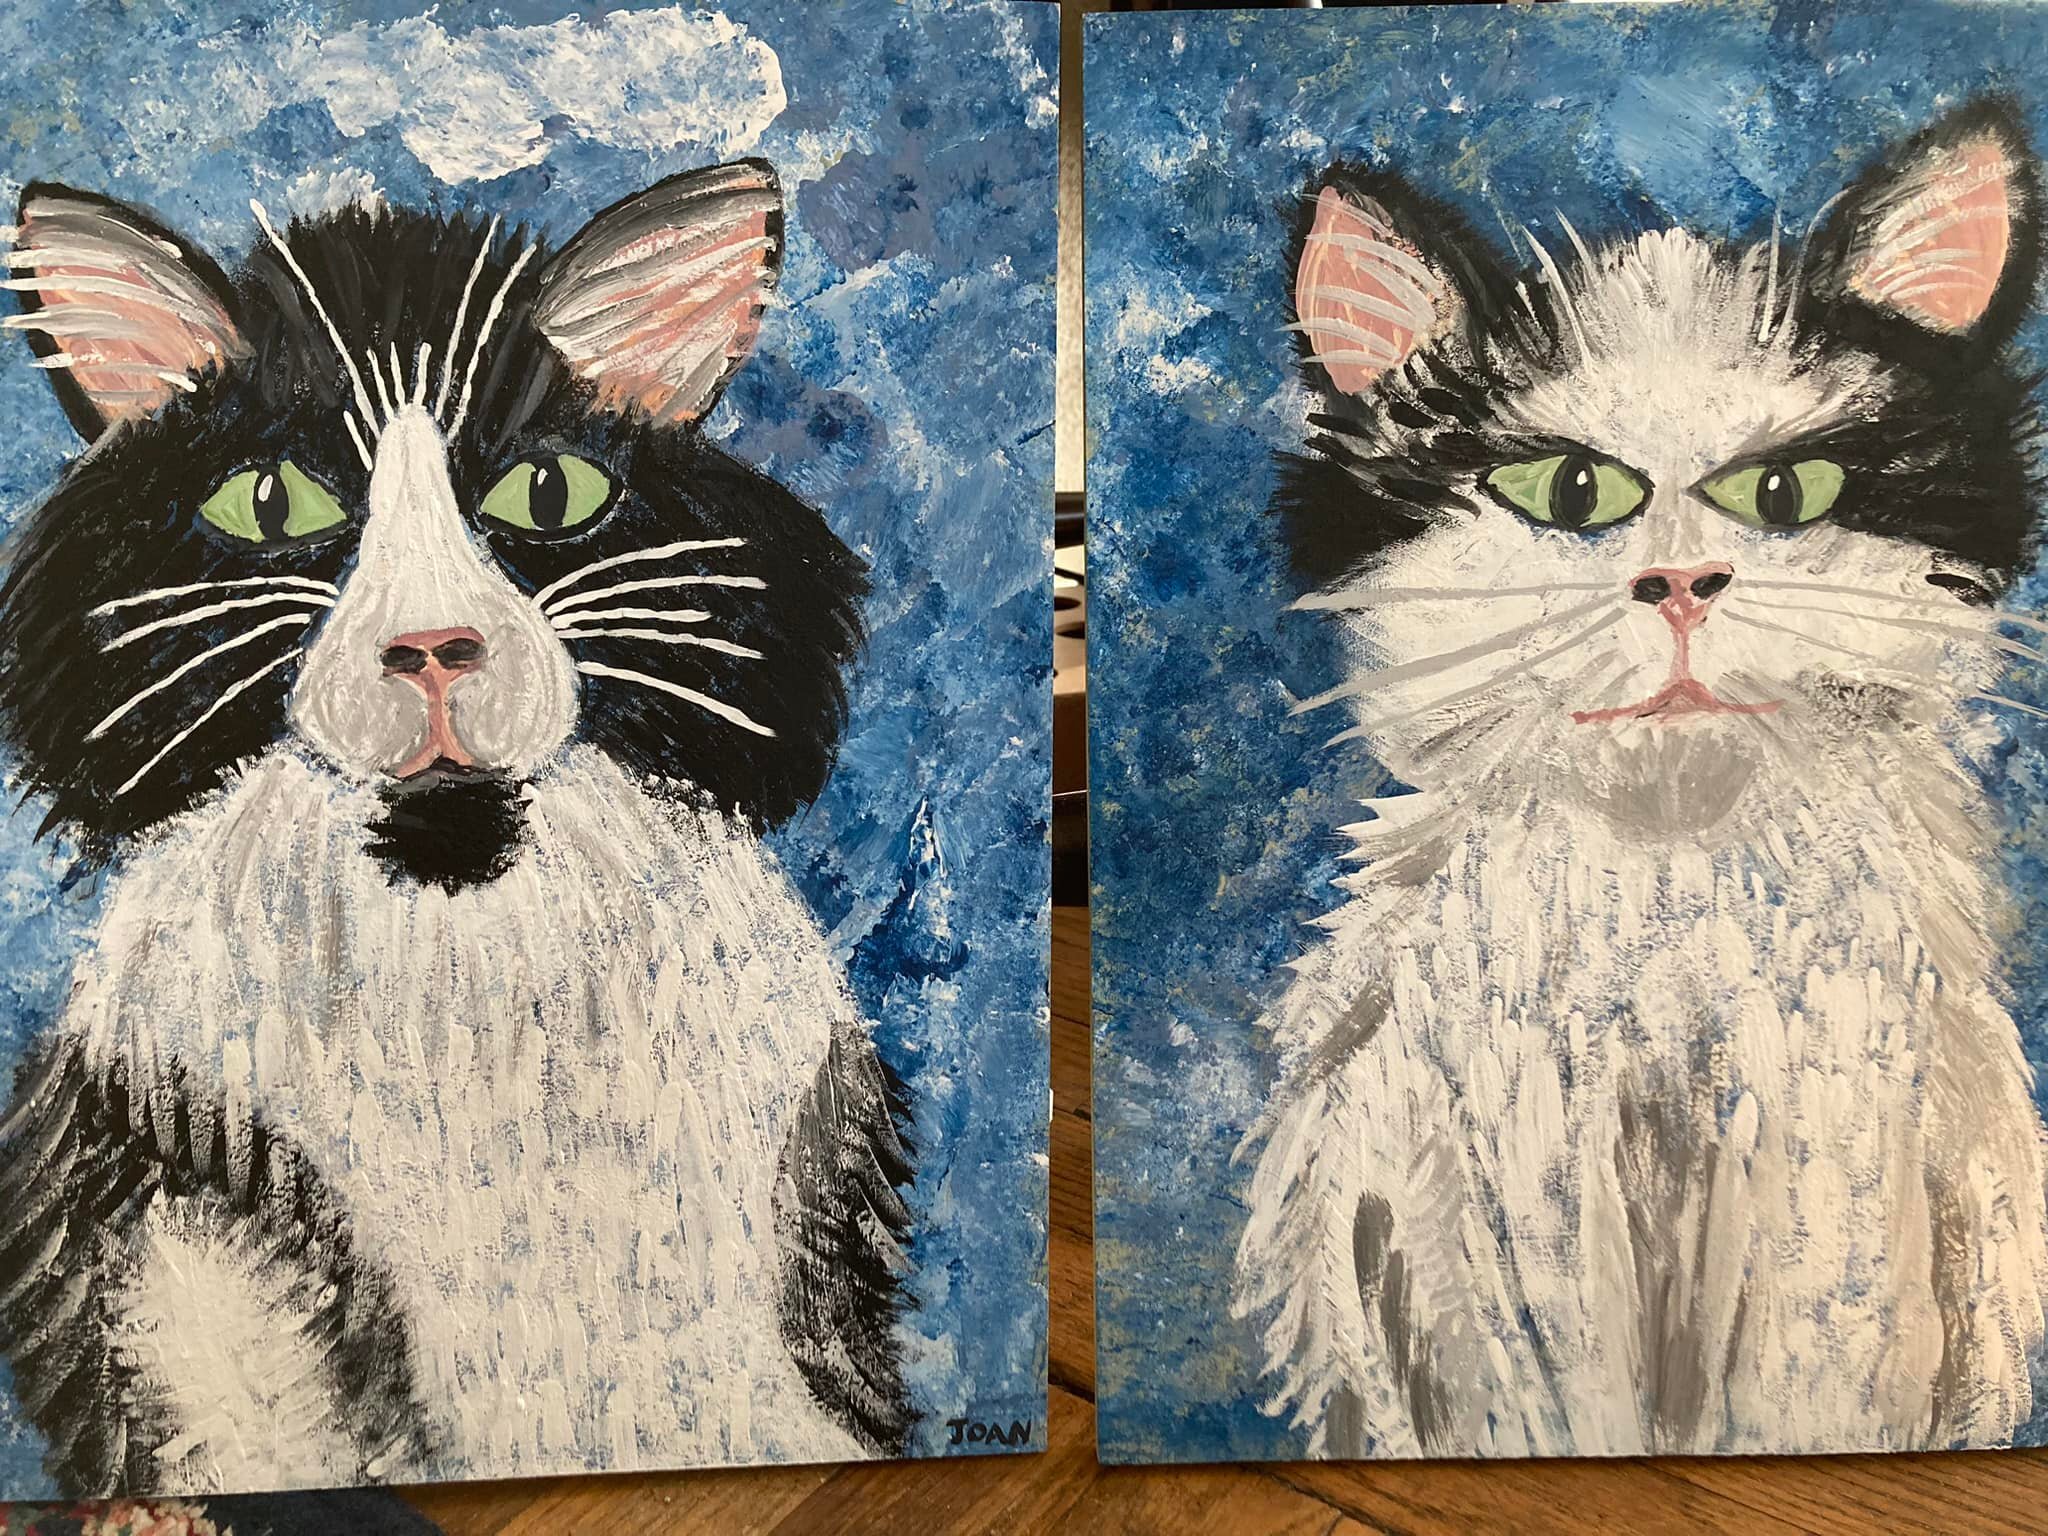 Writer Mark Wedel commissioned art of his cats from artWork' artist Joan Ruiz, who is known for her colorful, cheerful animal paintings.